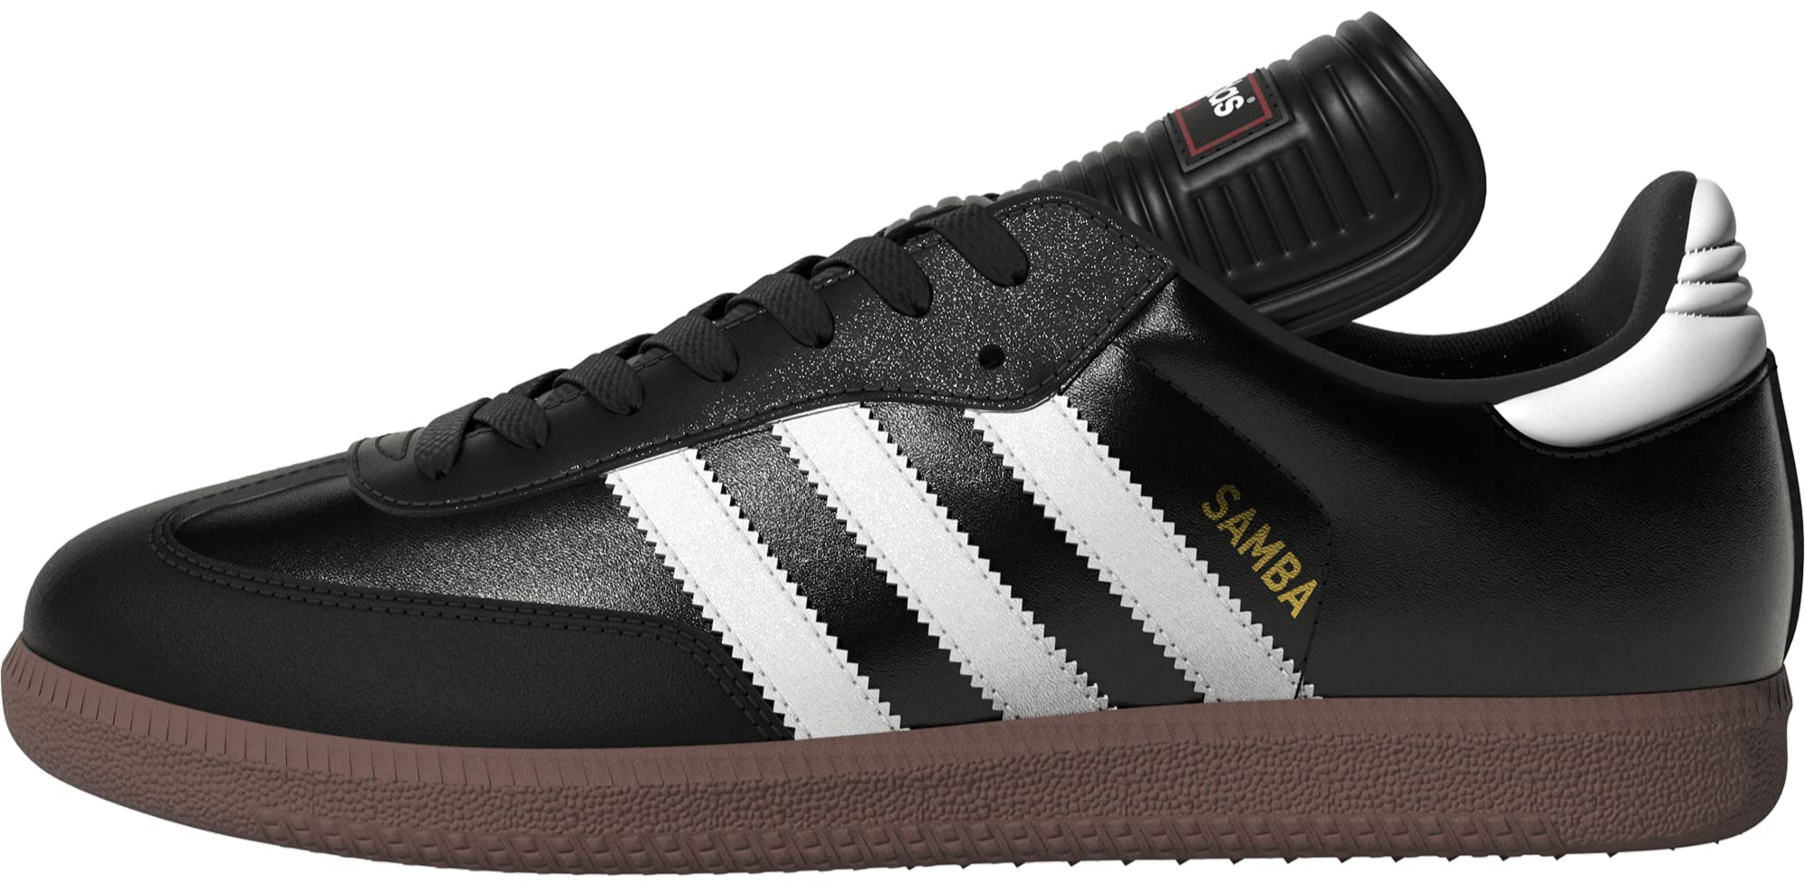 Limited-time deal: adidas Men's Samba Classic Soccer Shoe - $50 at Amazon